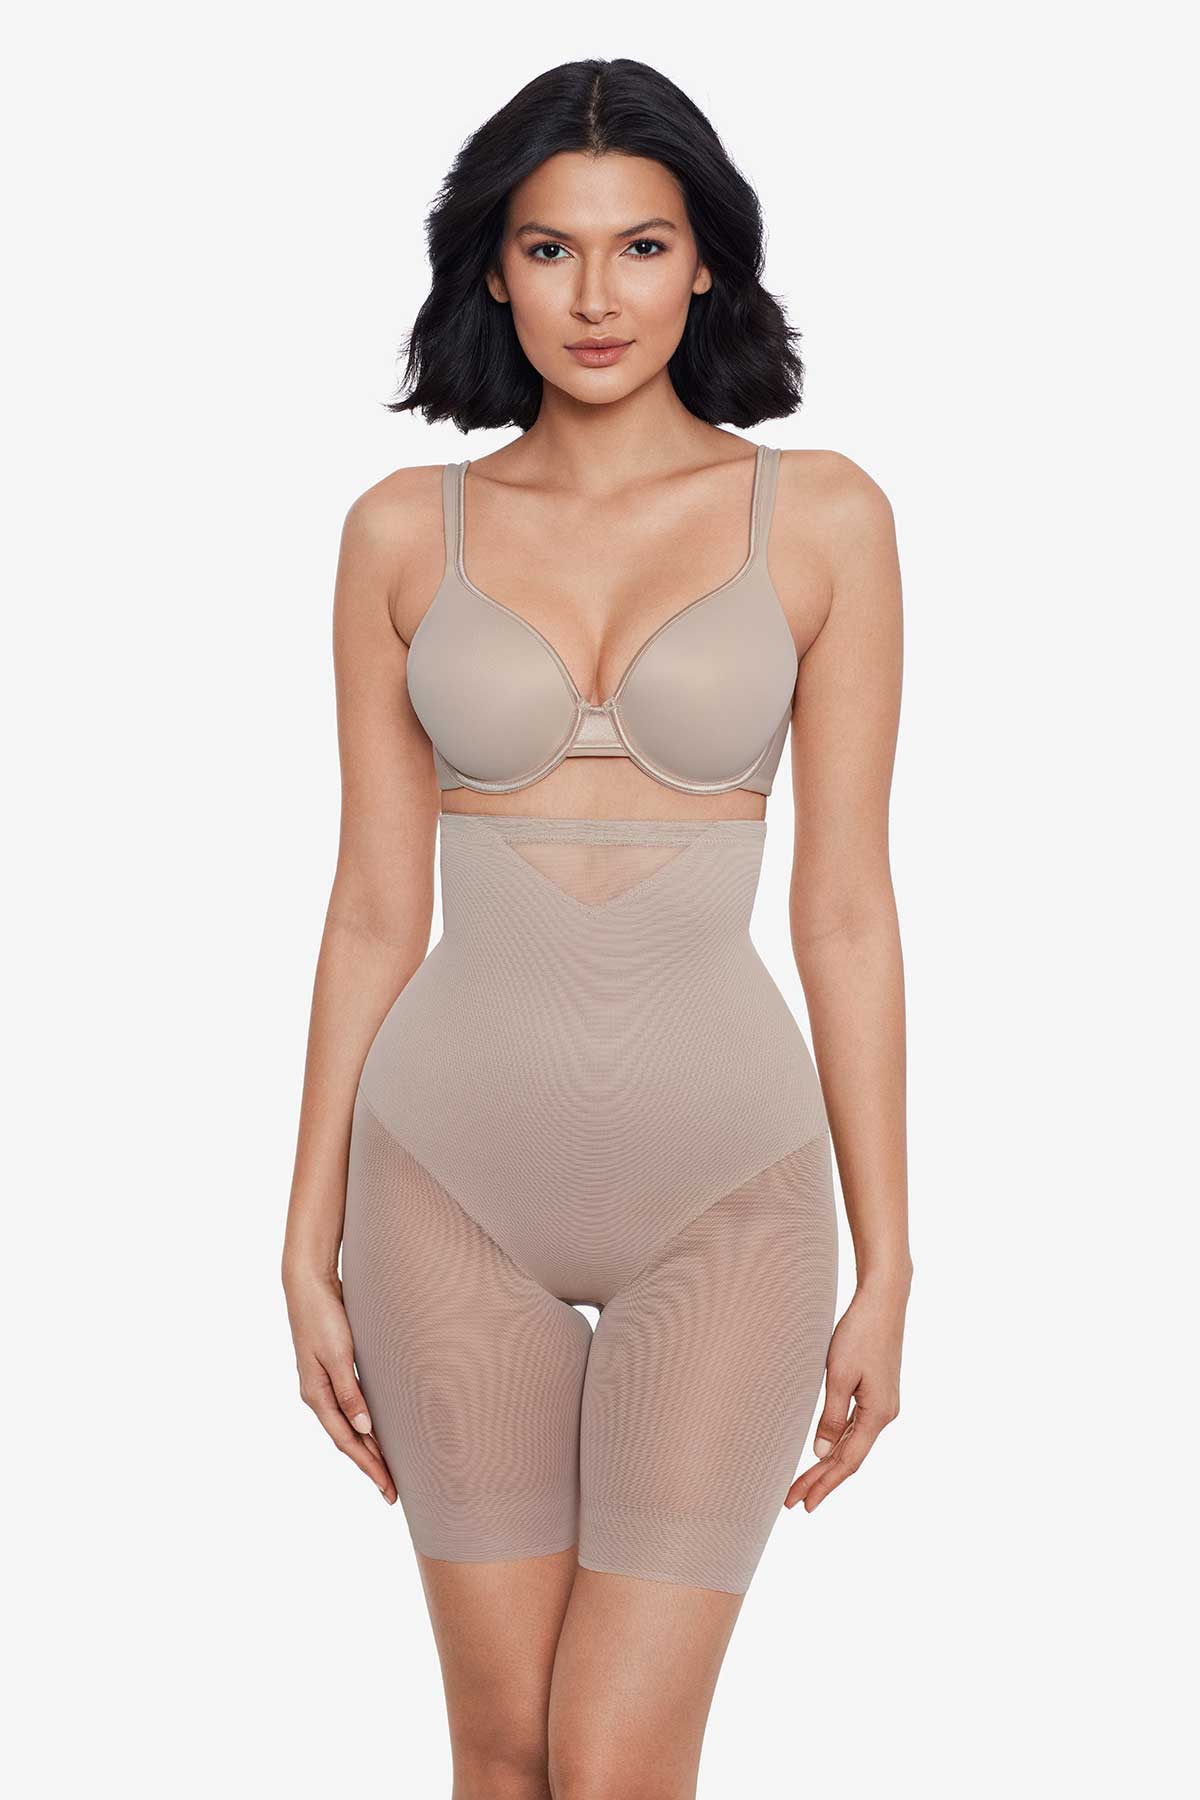 Miraclesuit Shapewear Women's Extra Firm Waist Cincher Nude Body